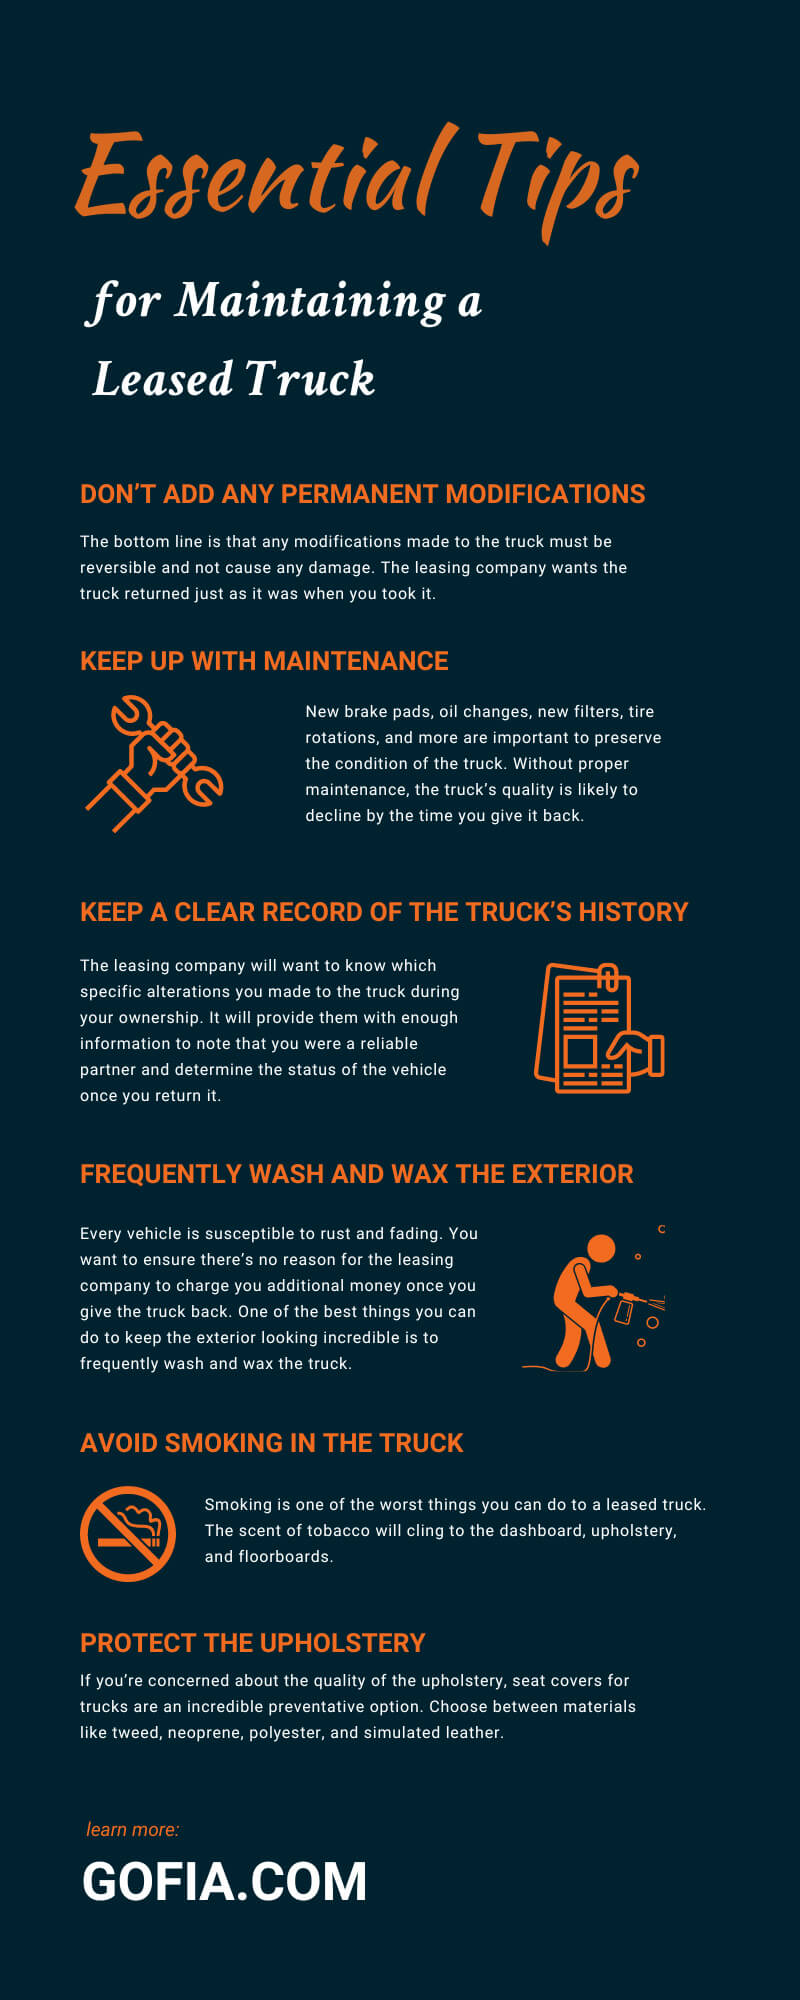 Essential Tips for Maintaining a Leased Truck